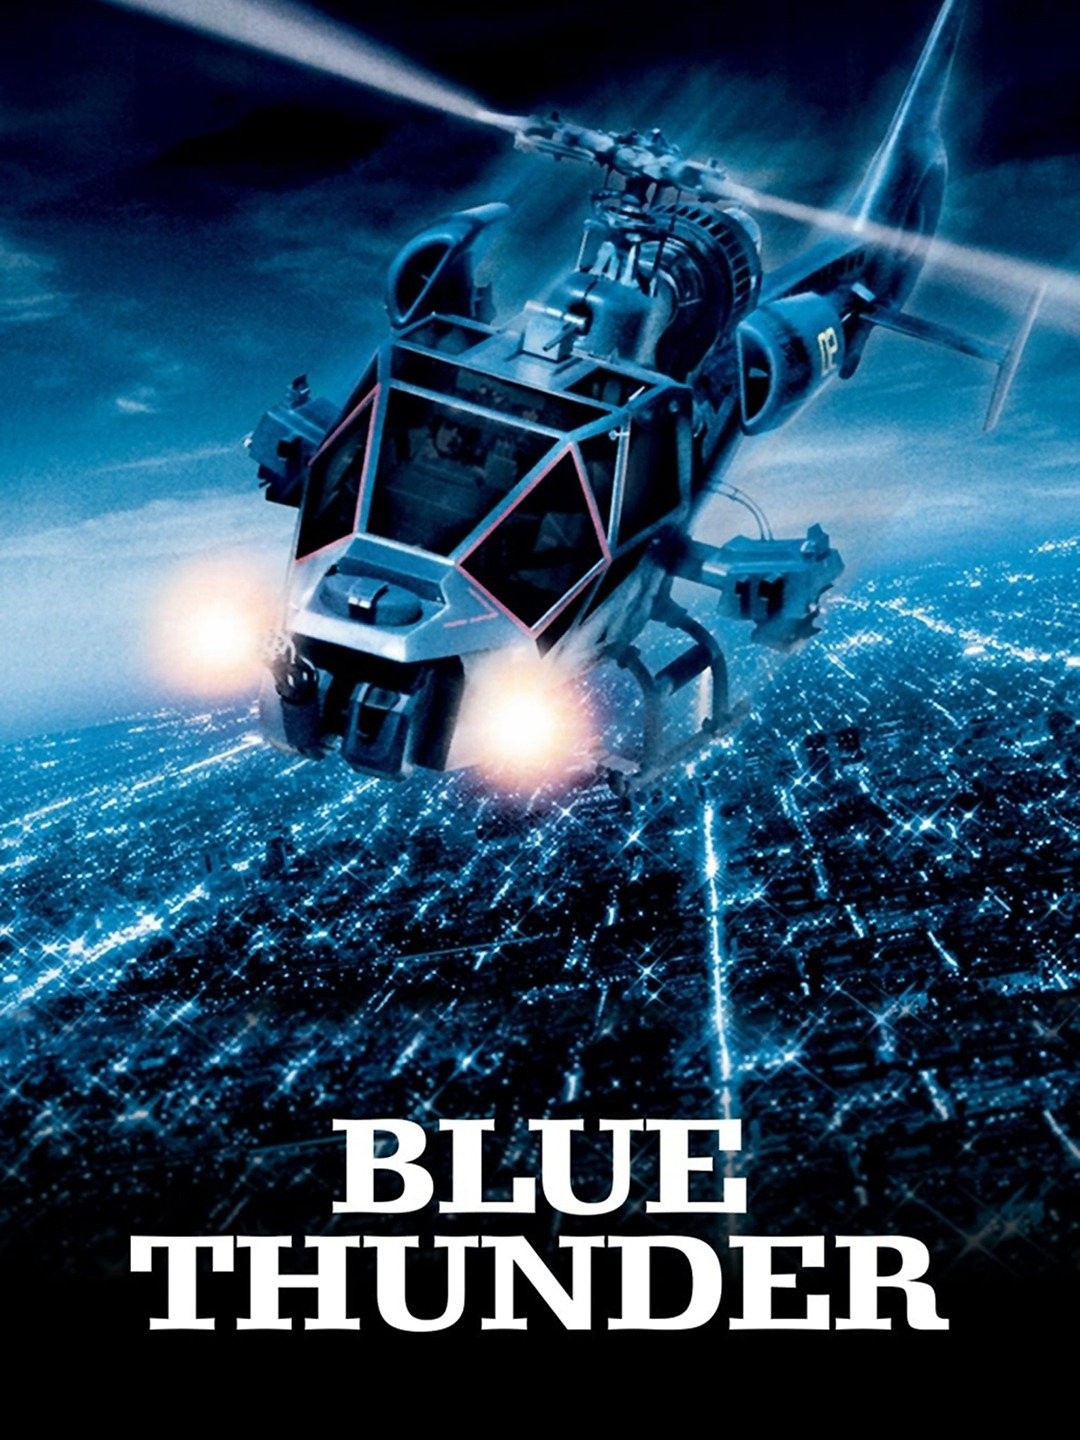 Classic Action: Blue Thunder (1983) – He's Out There